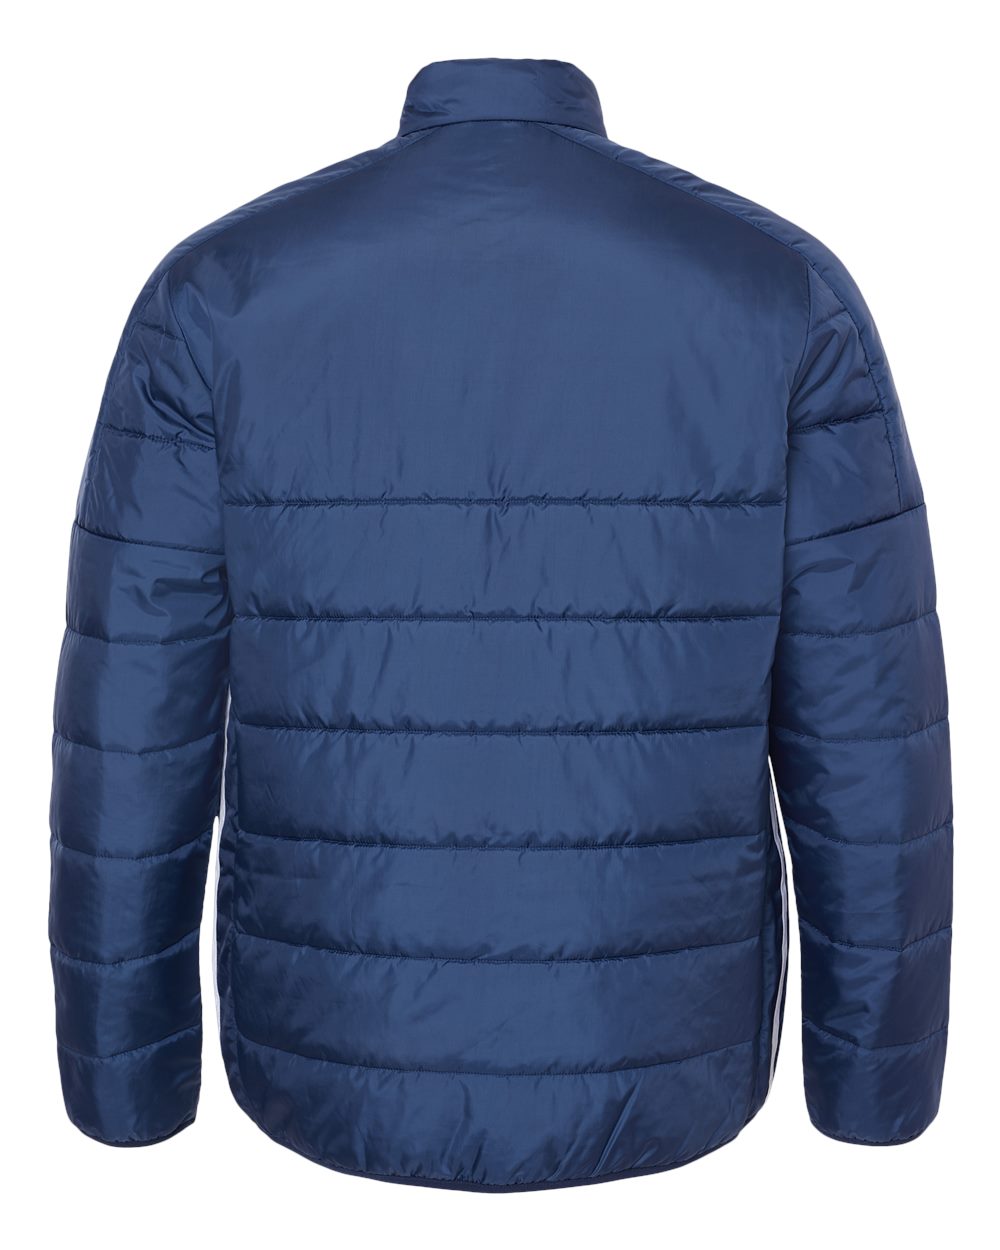 Adidas A570 Puffer Jacket #color_Team Navy Blue